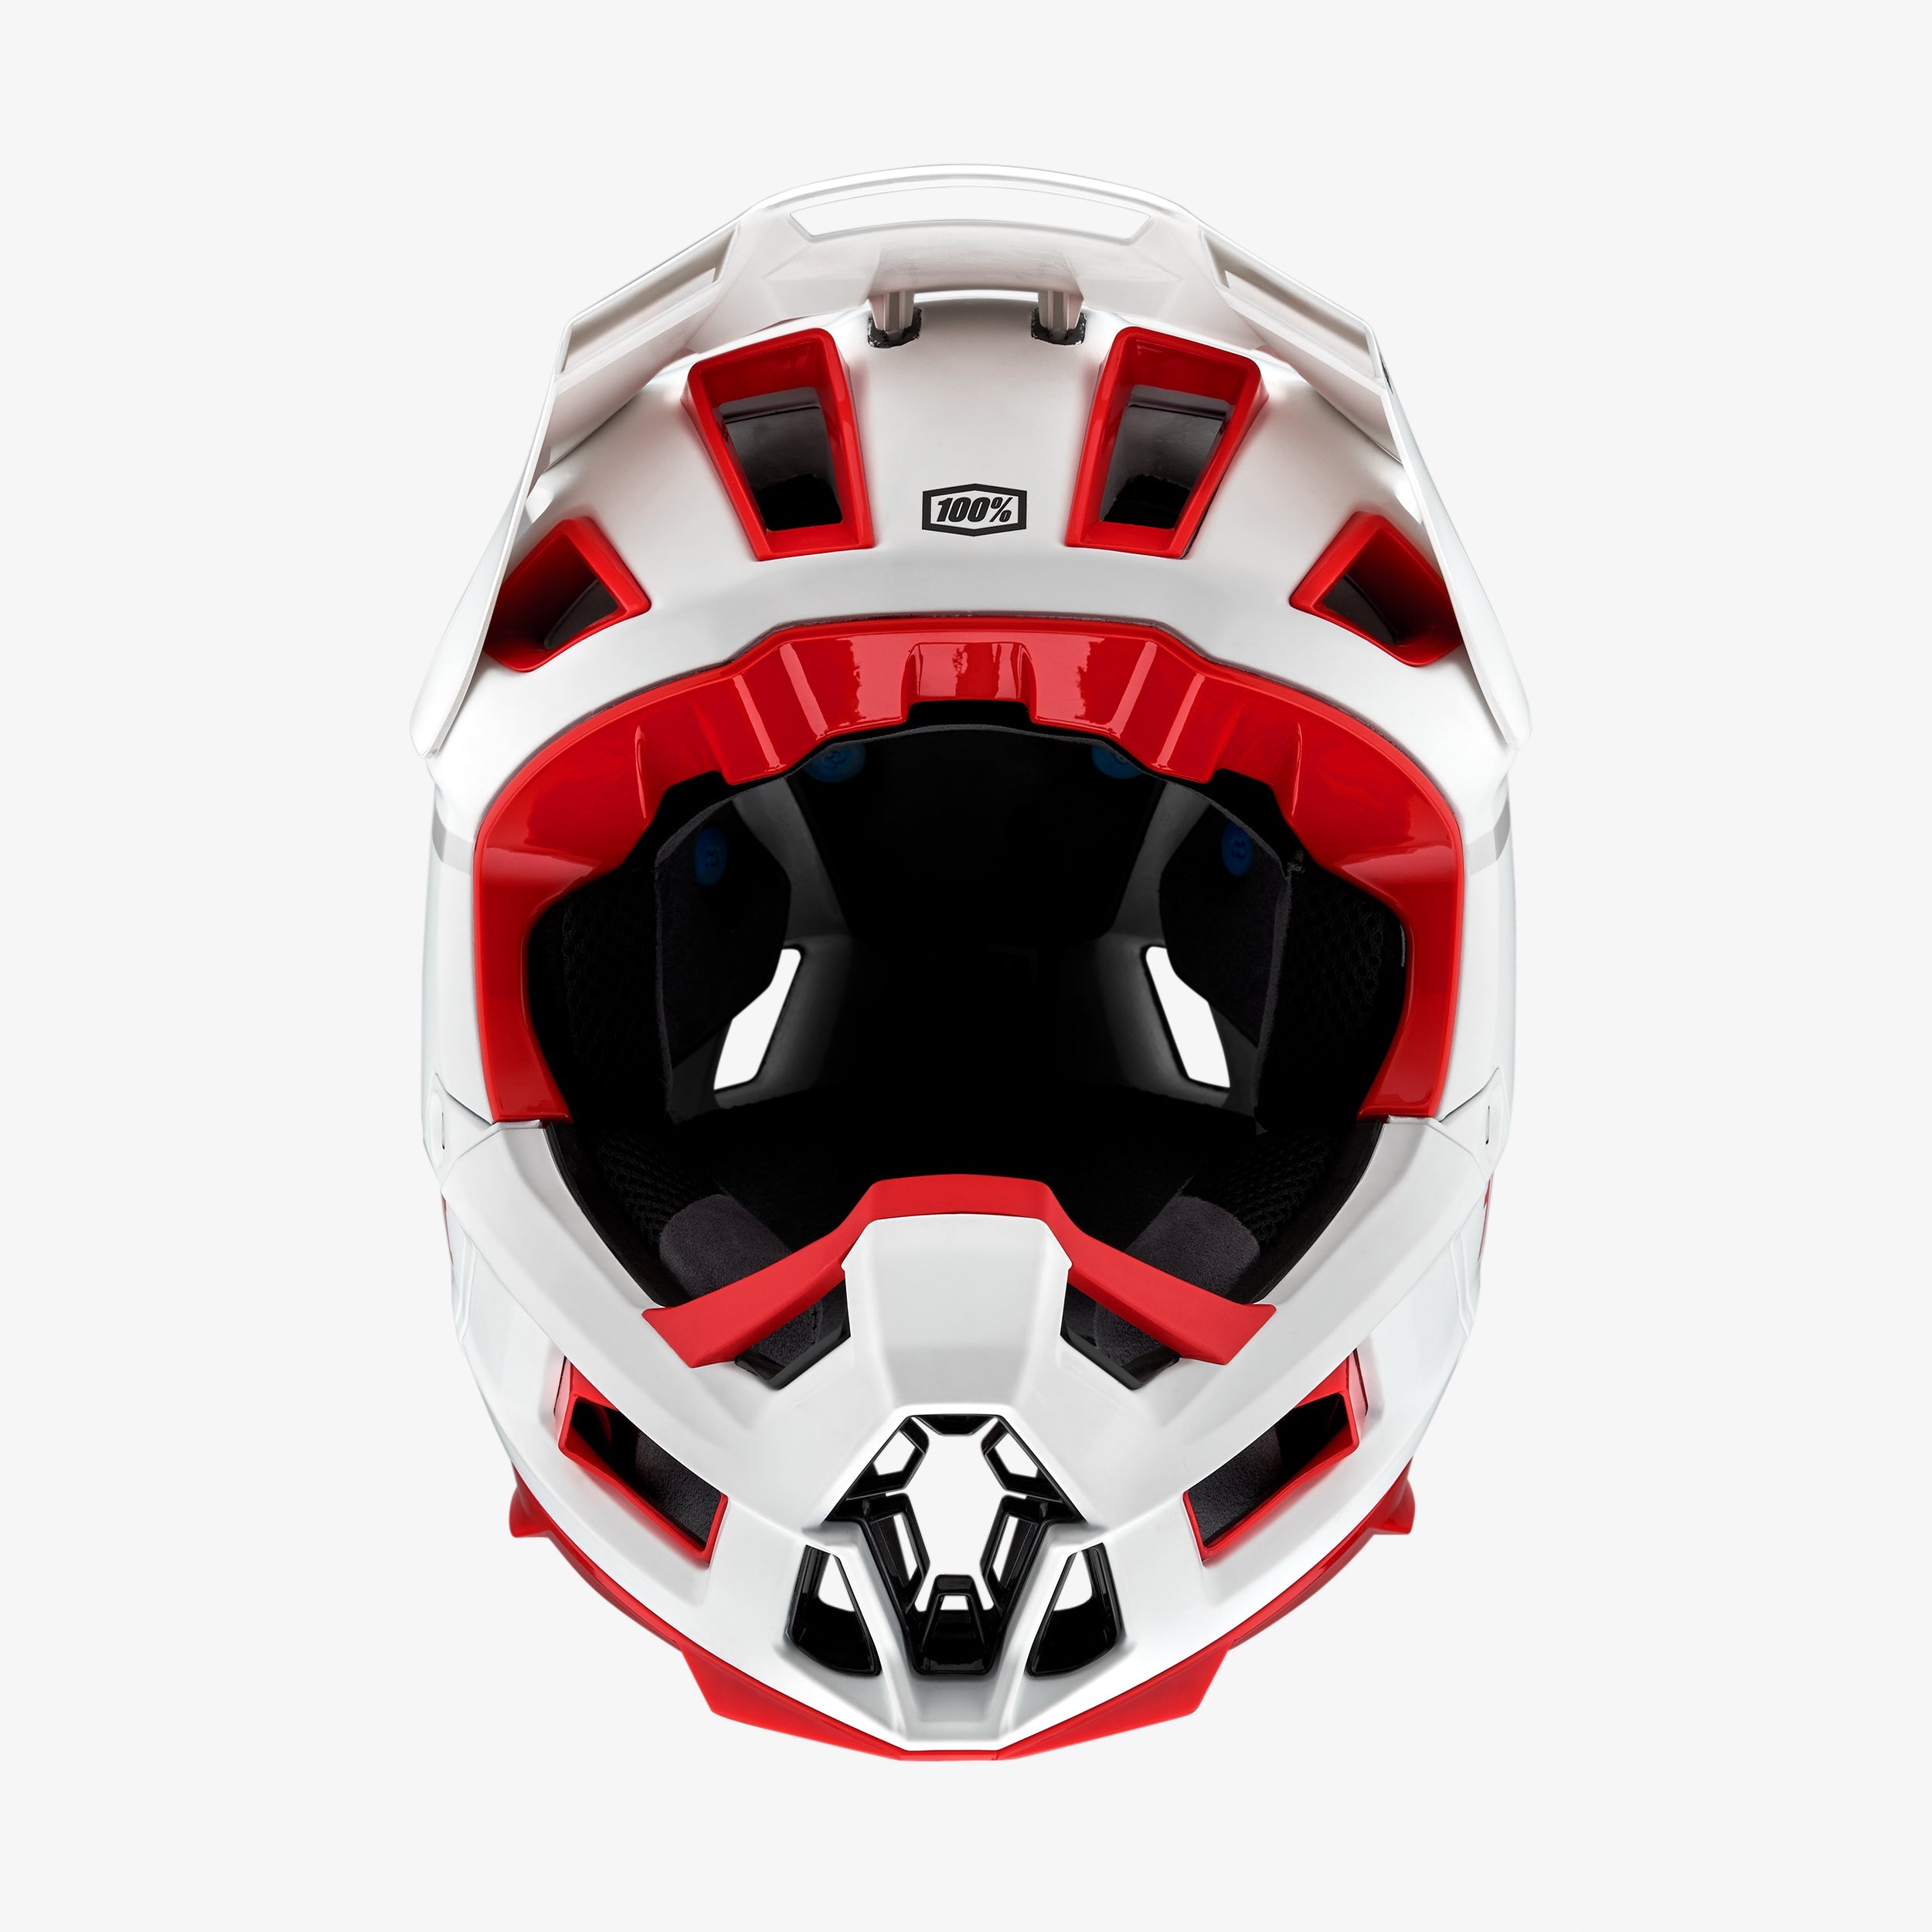 AIRCRAFT 2 Helmet Red/White - Secondary